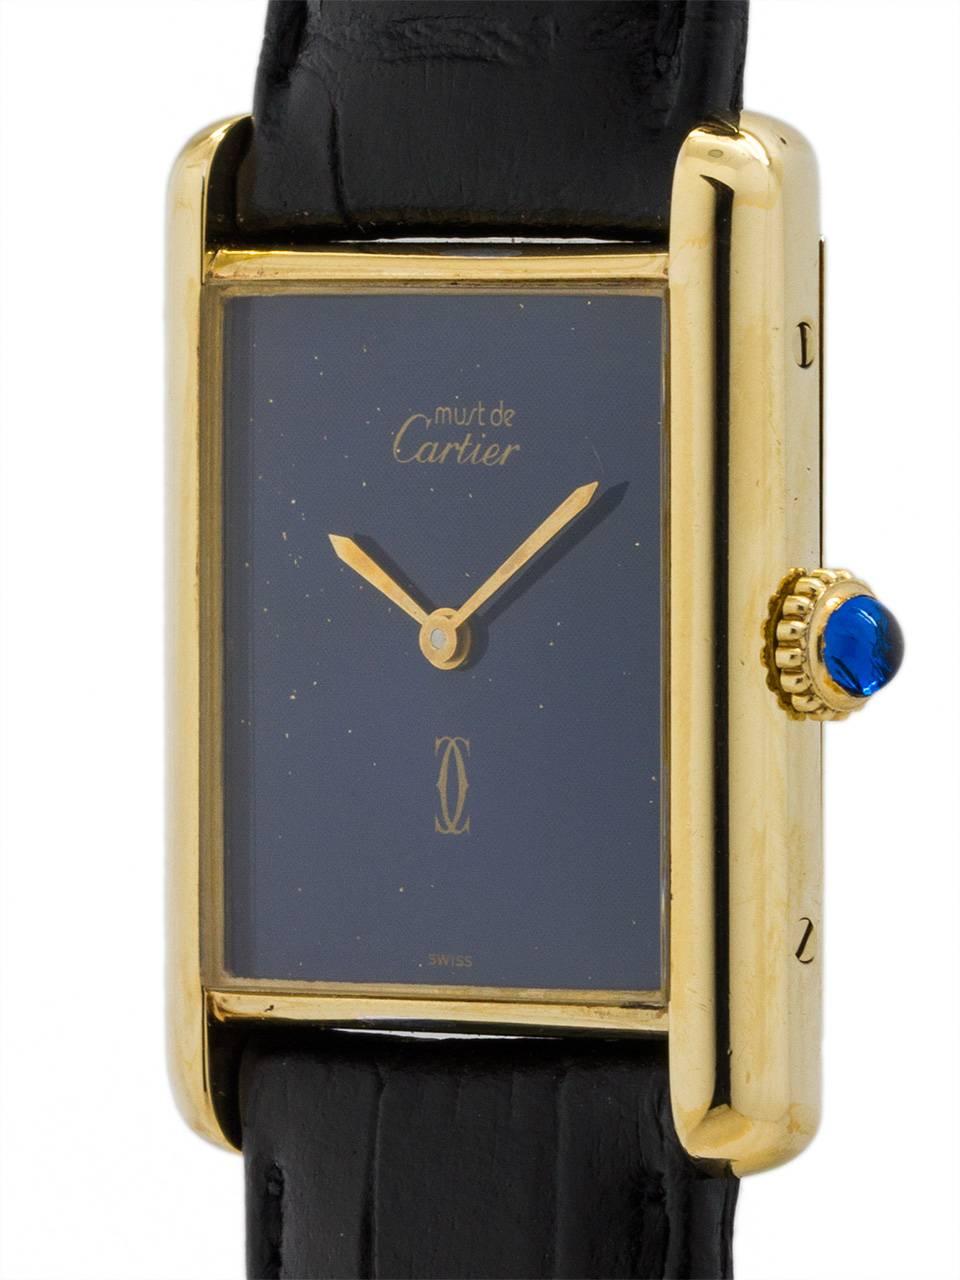 Cartier Man’s Tank Louis vermeil circa 1970s. 23.5 x 31mm case with mineral glass crystal and blue cabochon sapphire crown. With pleasing “faux” lapis blue dial signed Must de Cartier with double C logo and gold hands. The 23.5mm case width means